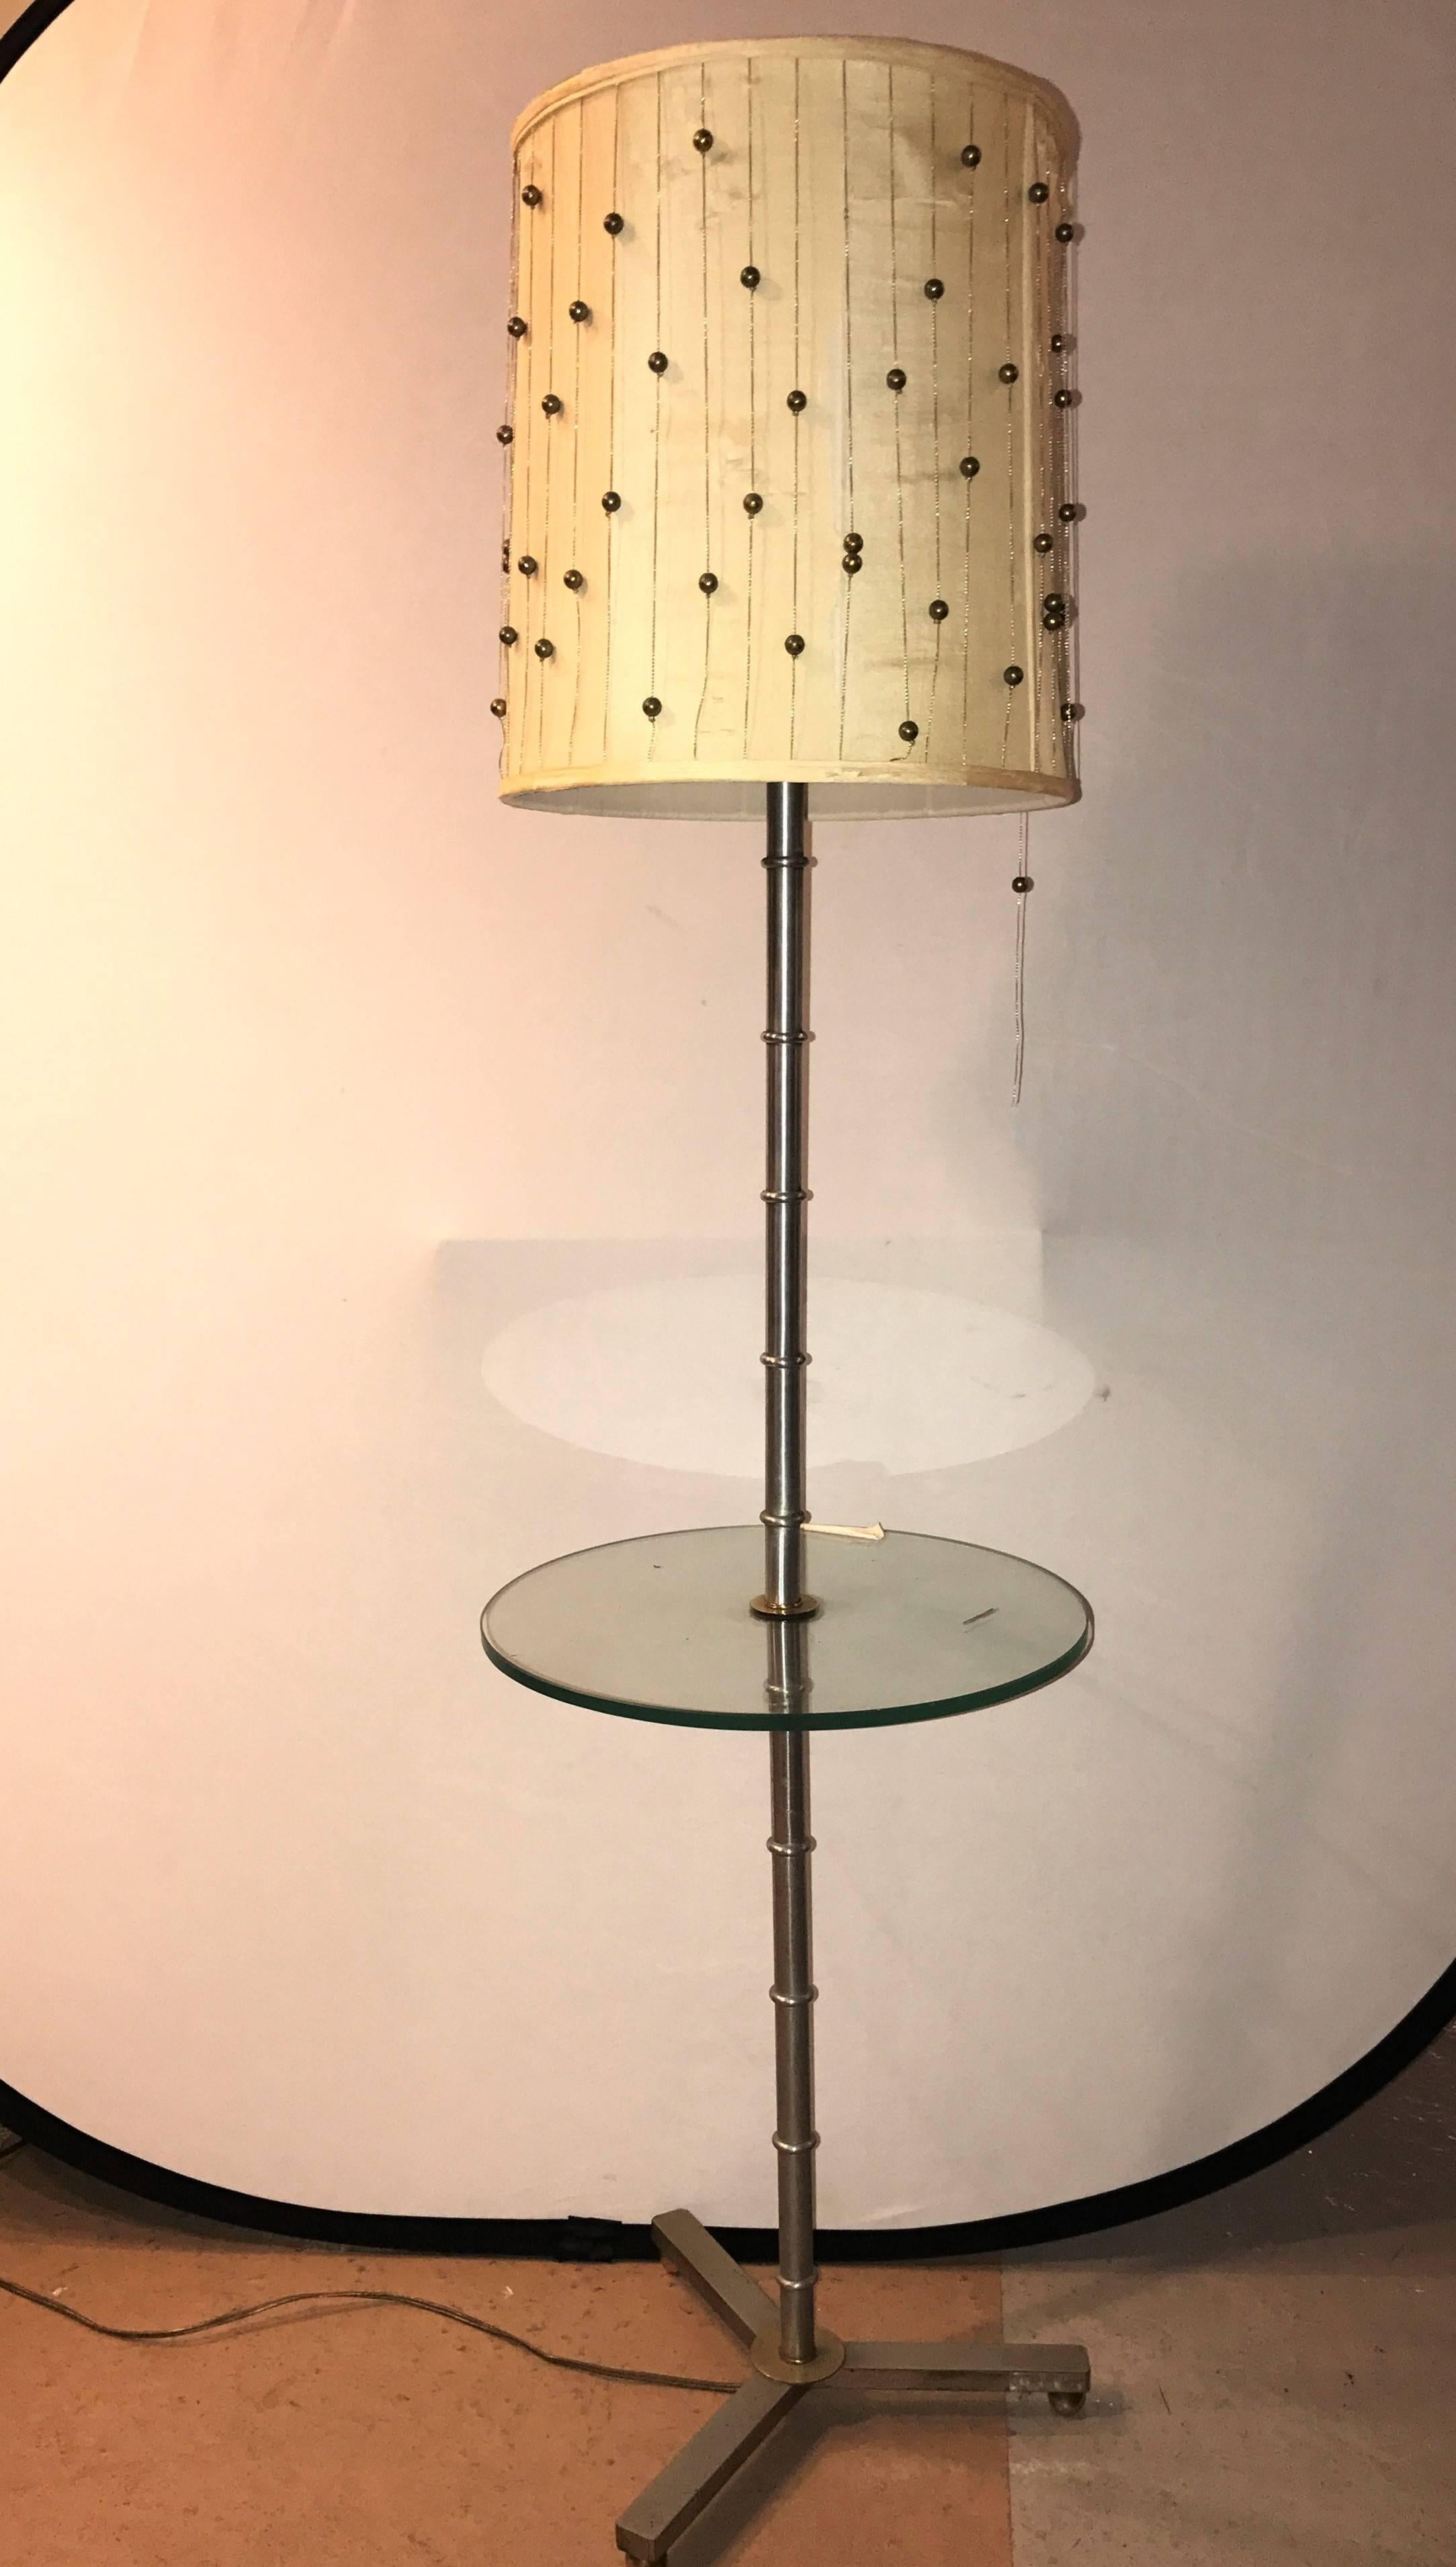 A faux bamboo form chrome standing floor lamp table Art Deco in form. The chrome Y shaped base on circular feet leading to a sleek chrome bamboo form center column which supports a circular glass tabletop. The whole taking two sixty watt standard